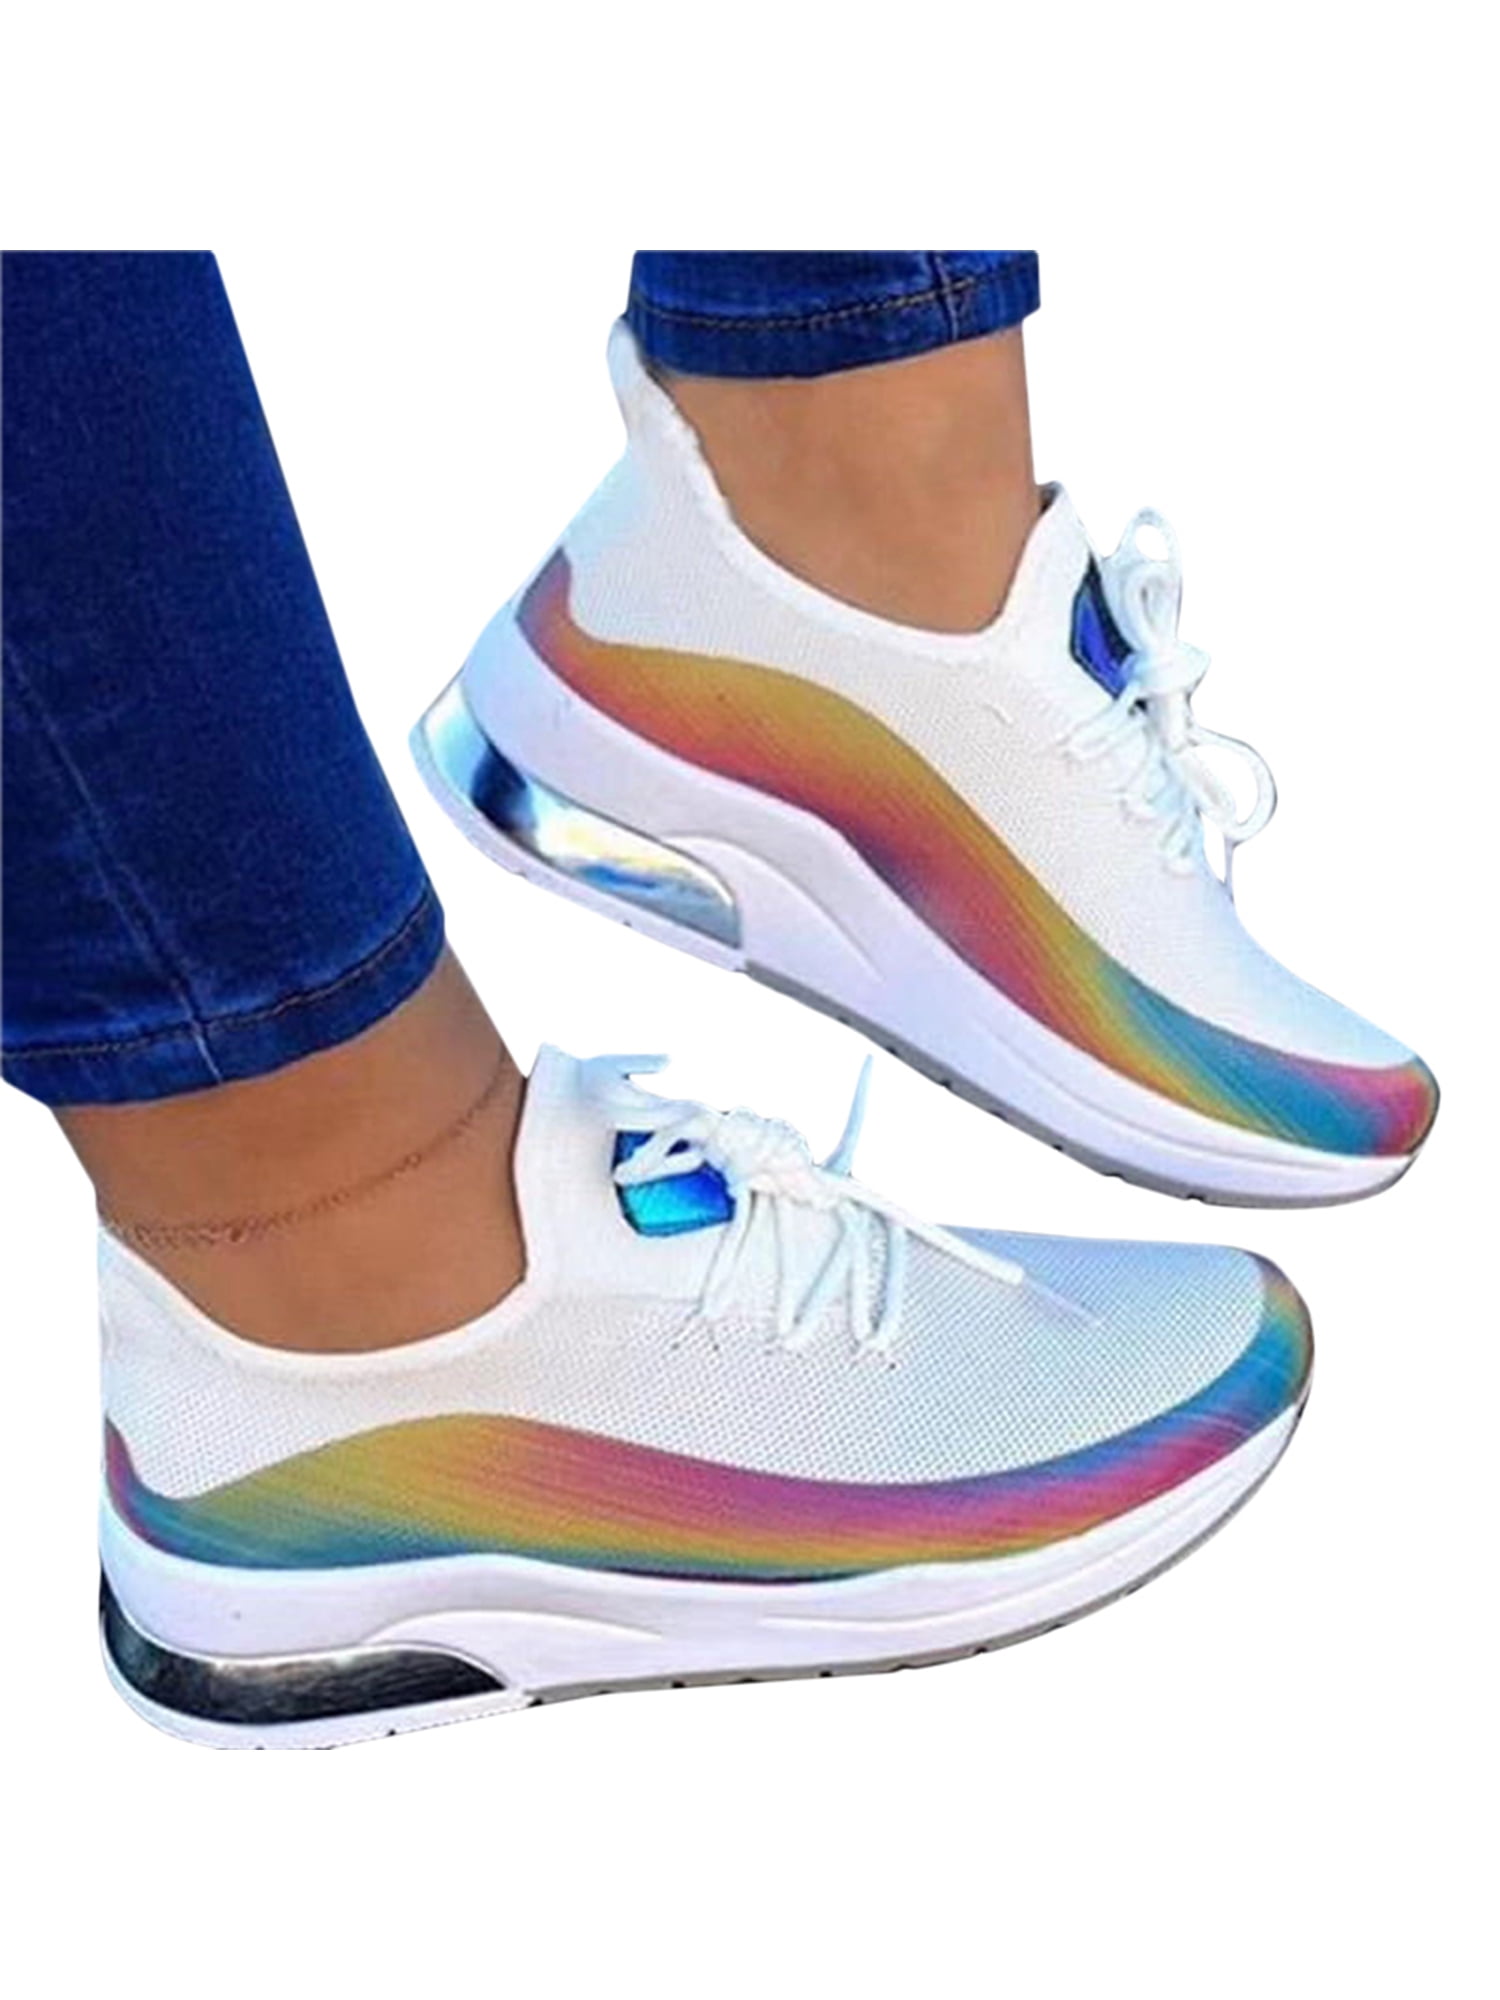 5 Day Rainbow Workout Shoes for Burn Fat fast